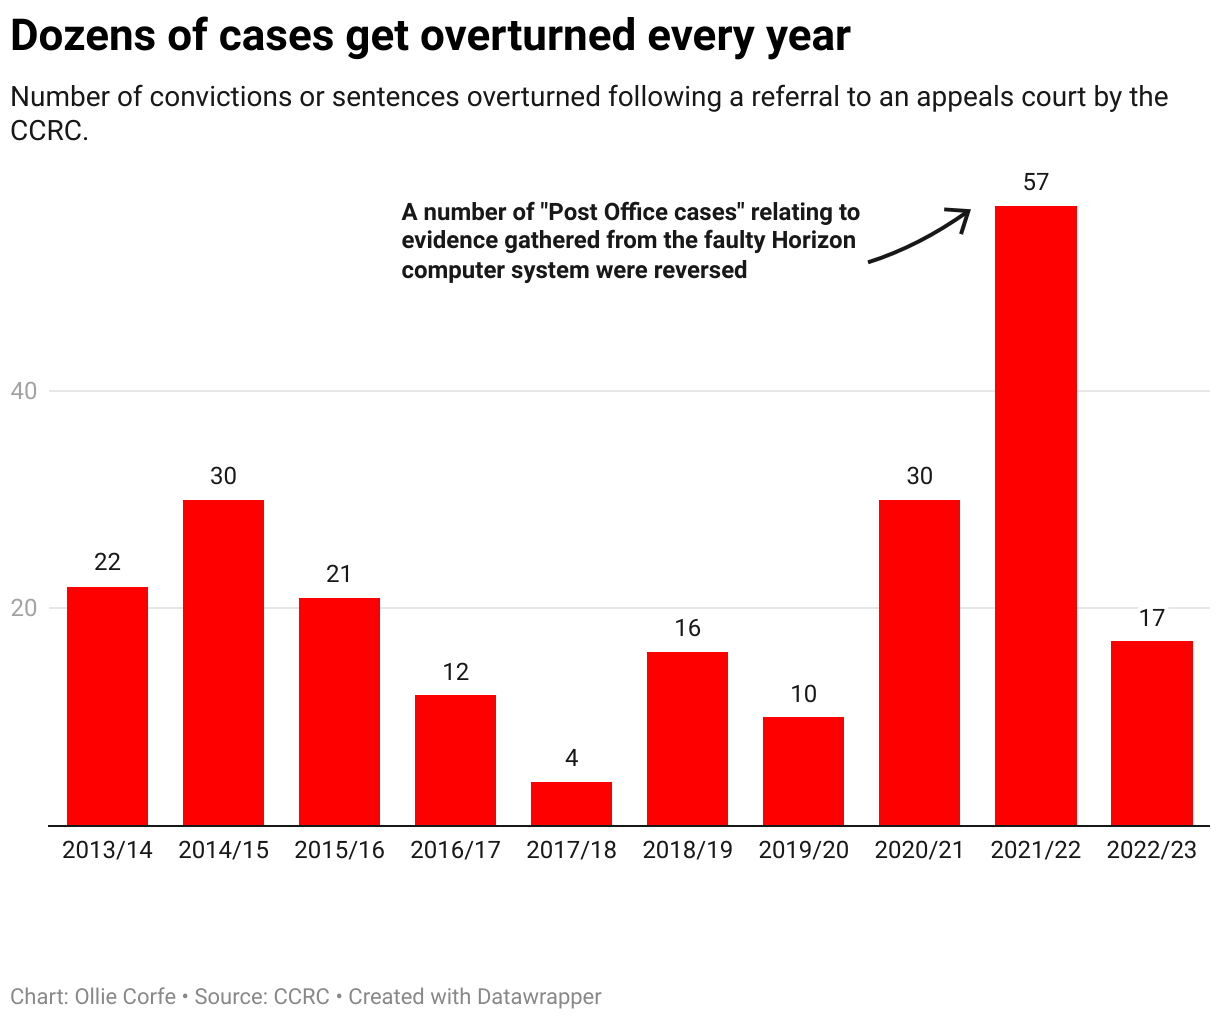 Number of cases overturned on appeal.